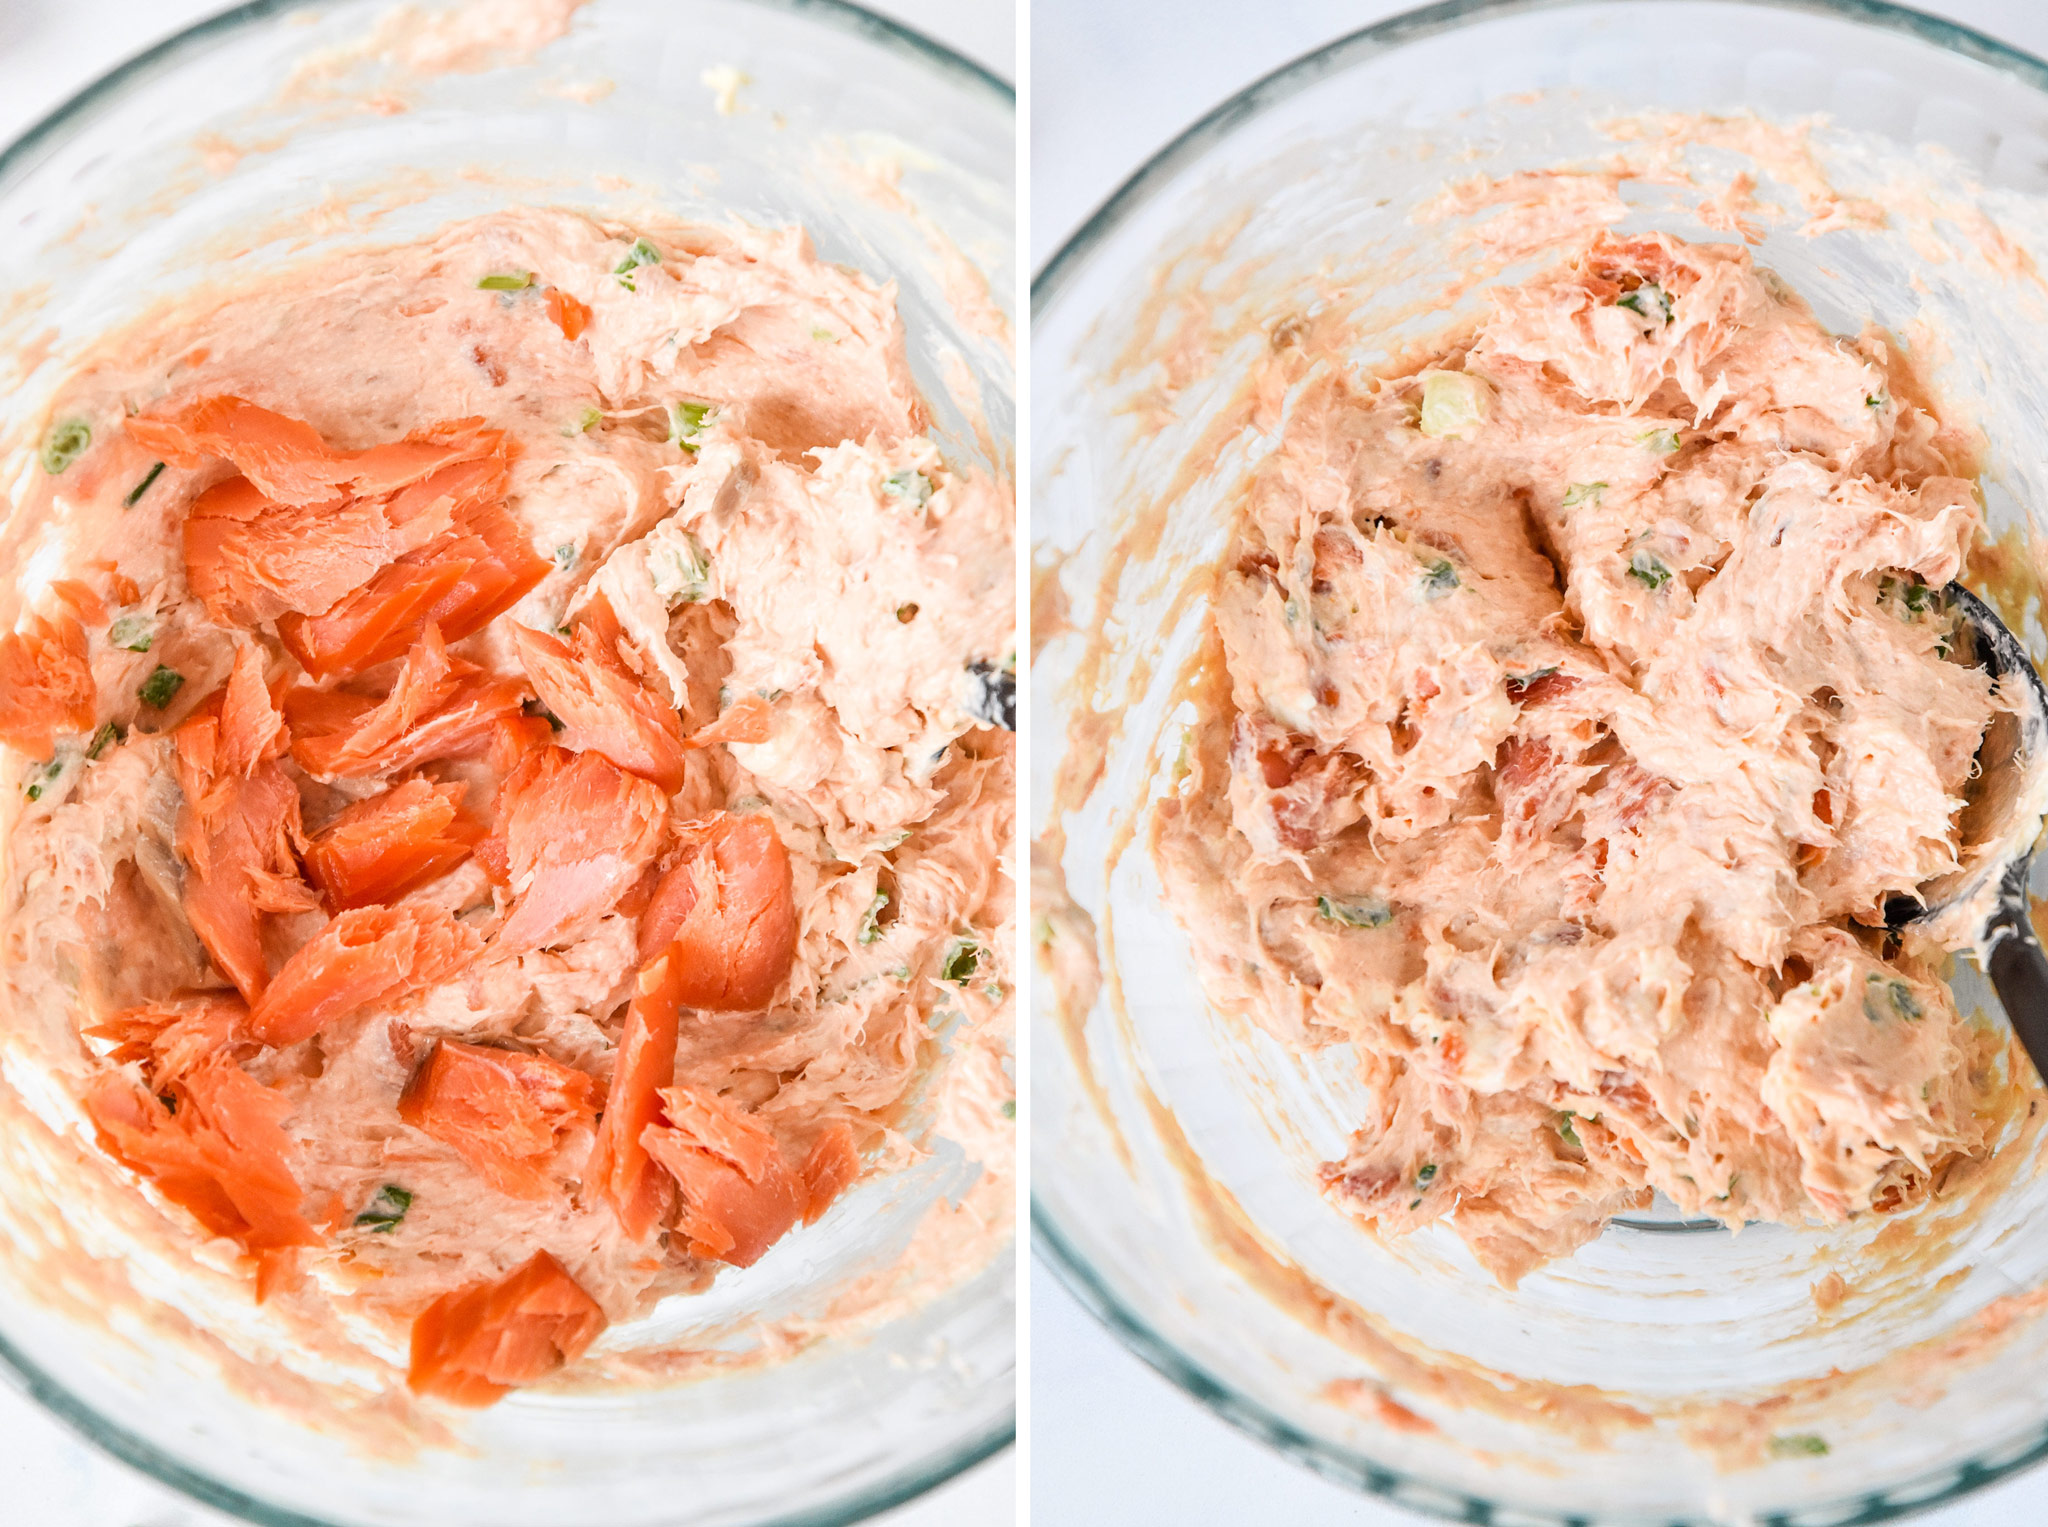 mixing in the chunks into the smoked salmon dip.